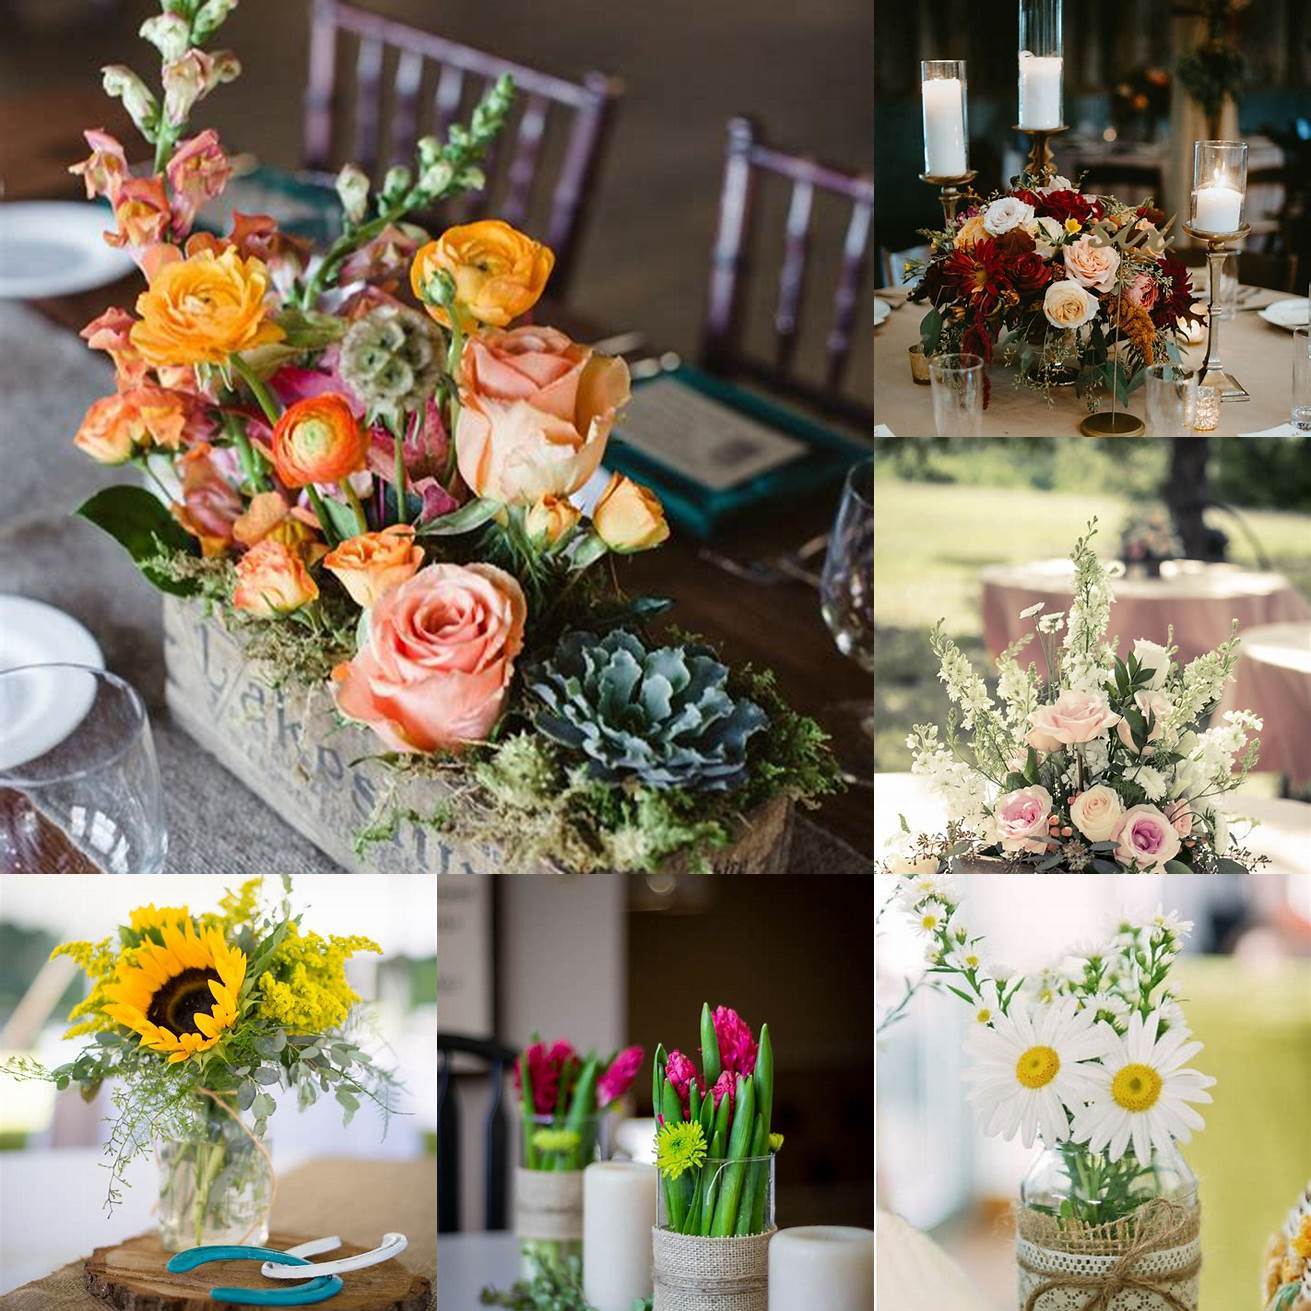 A simple floral centerpiece adds a pop of color to a rustic table